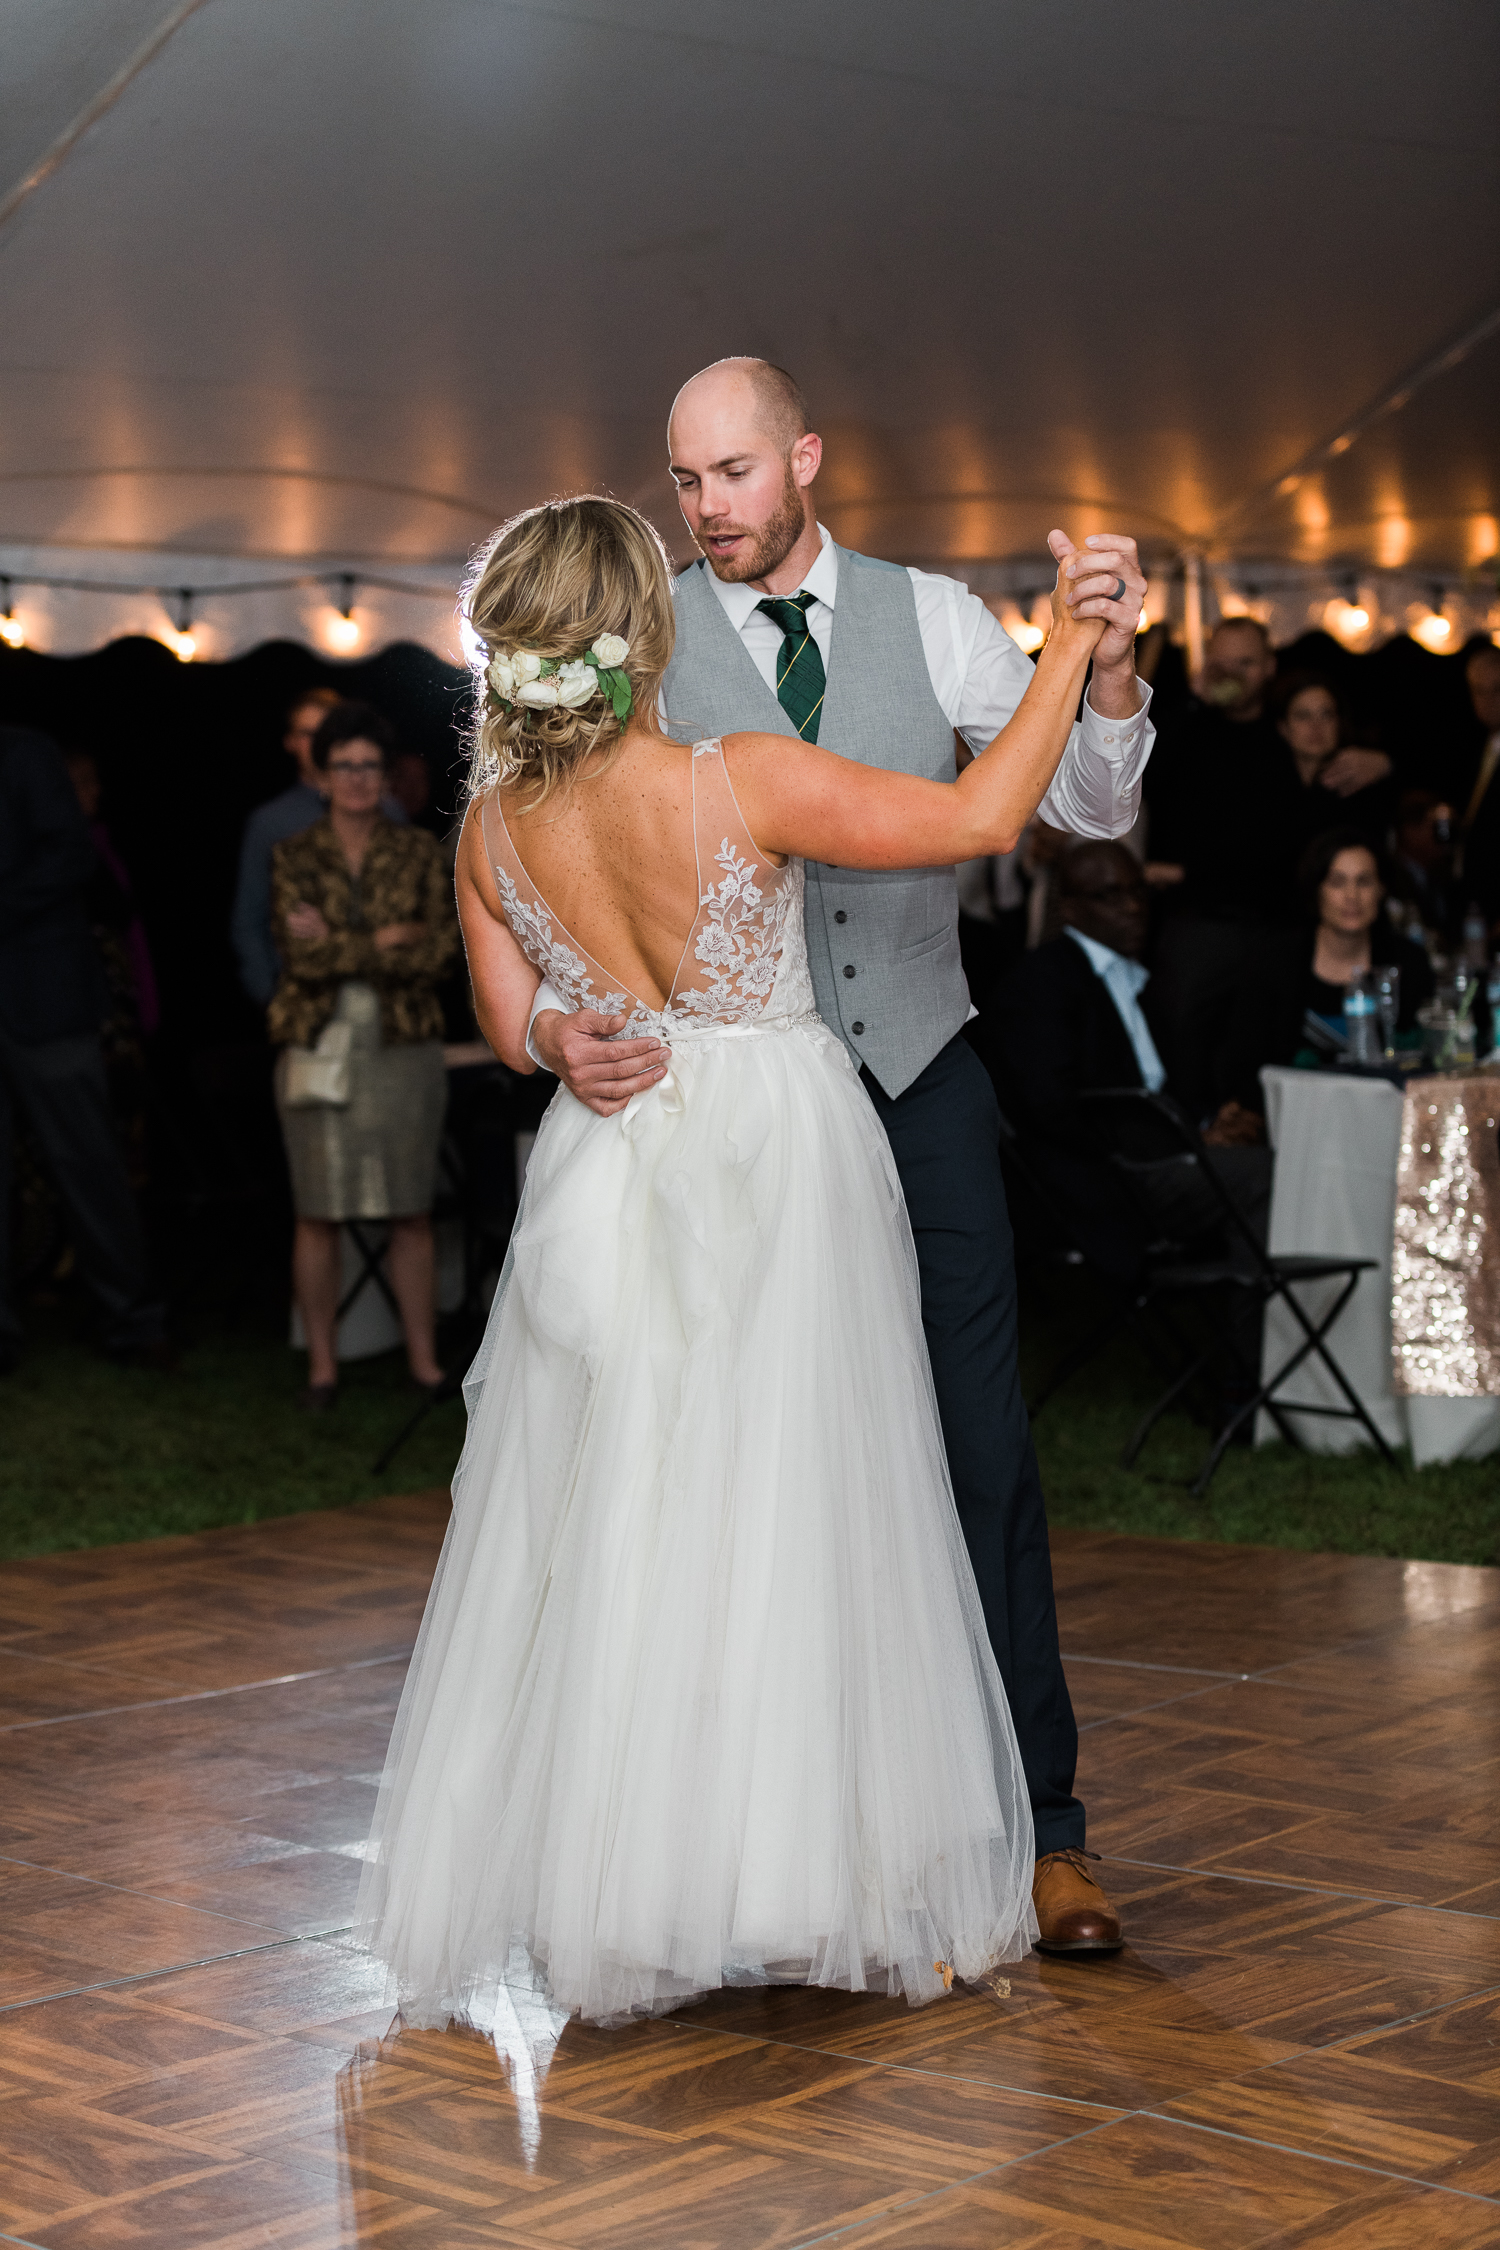 Newly married couple dancing at backyard tent wedding